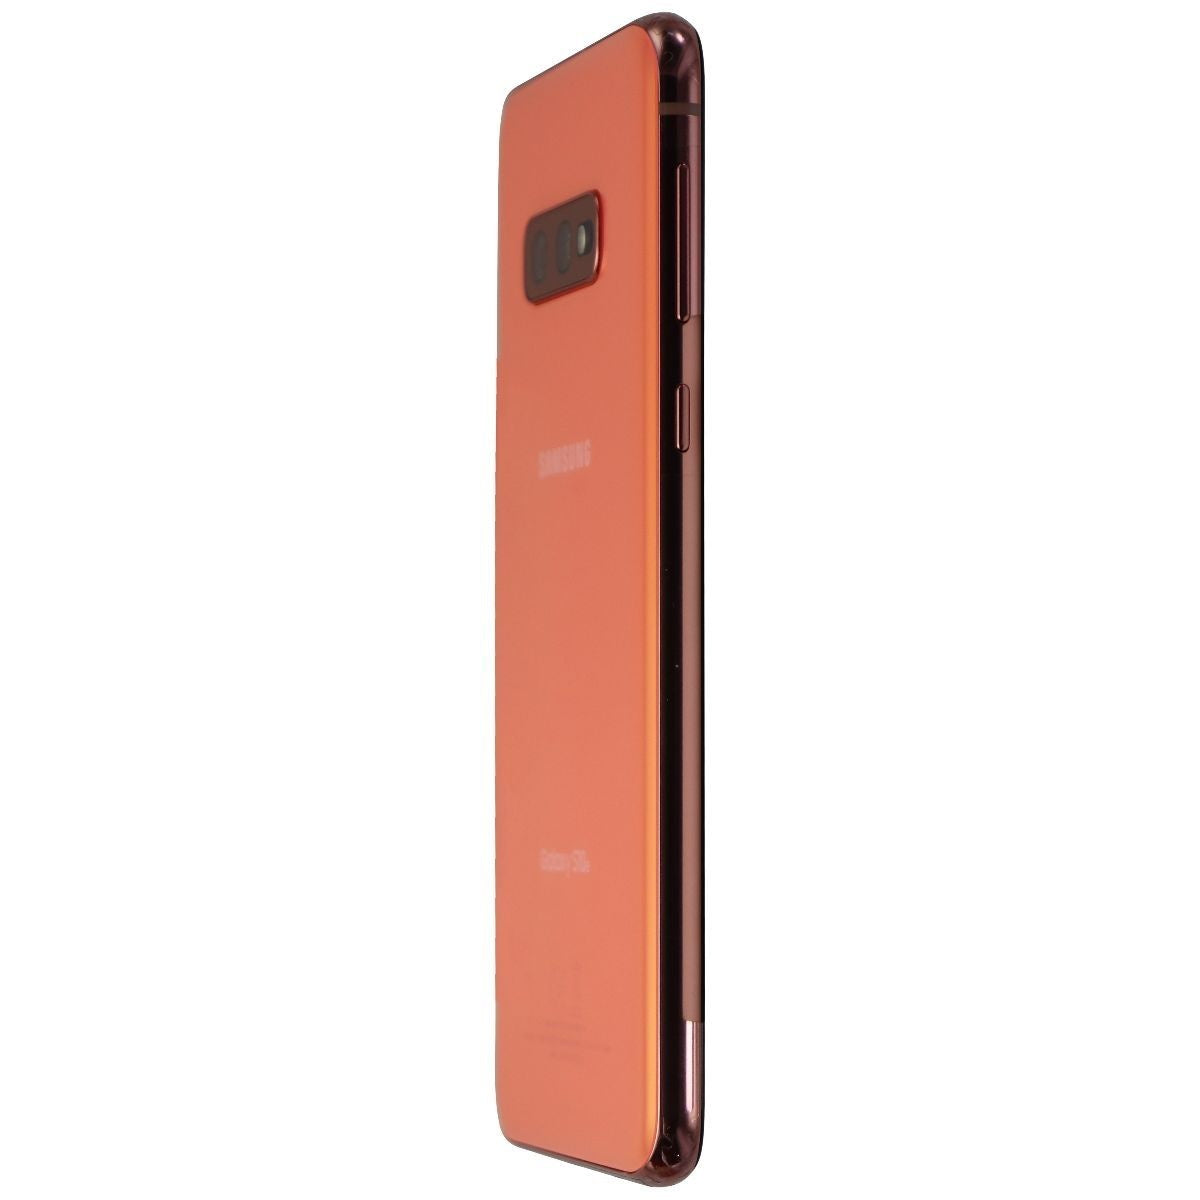 Samsung Galaxy S10e (5.8-in) Smartphone (SM-G970U1) GSM + CDMA - 128GB / Pink Cell Phones & Smartphones Samsung    - Simple Cell Bulk Wholesale Pricing - USA Seller